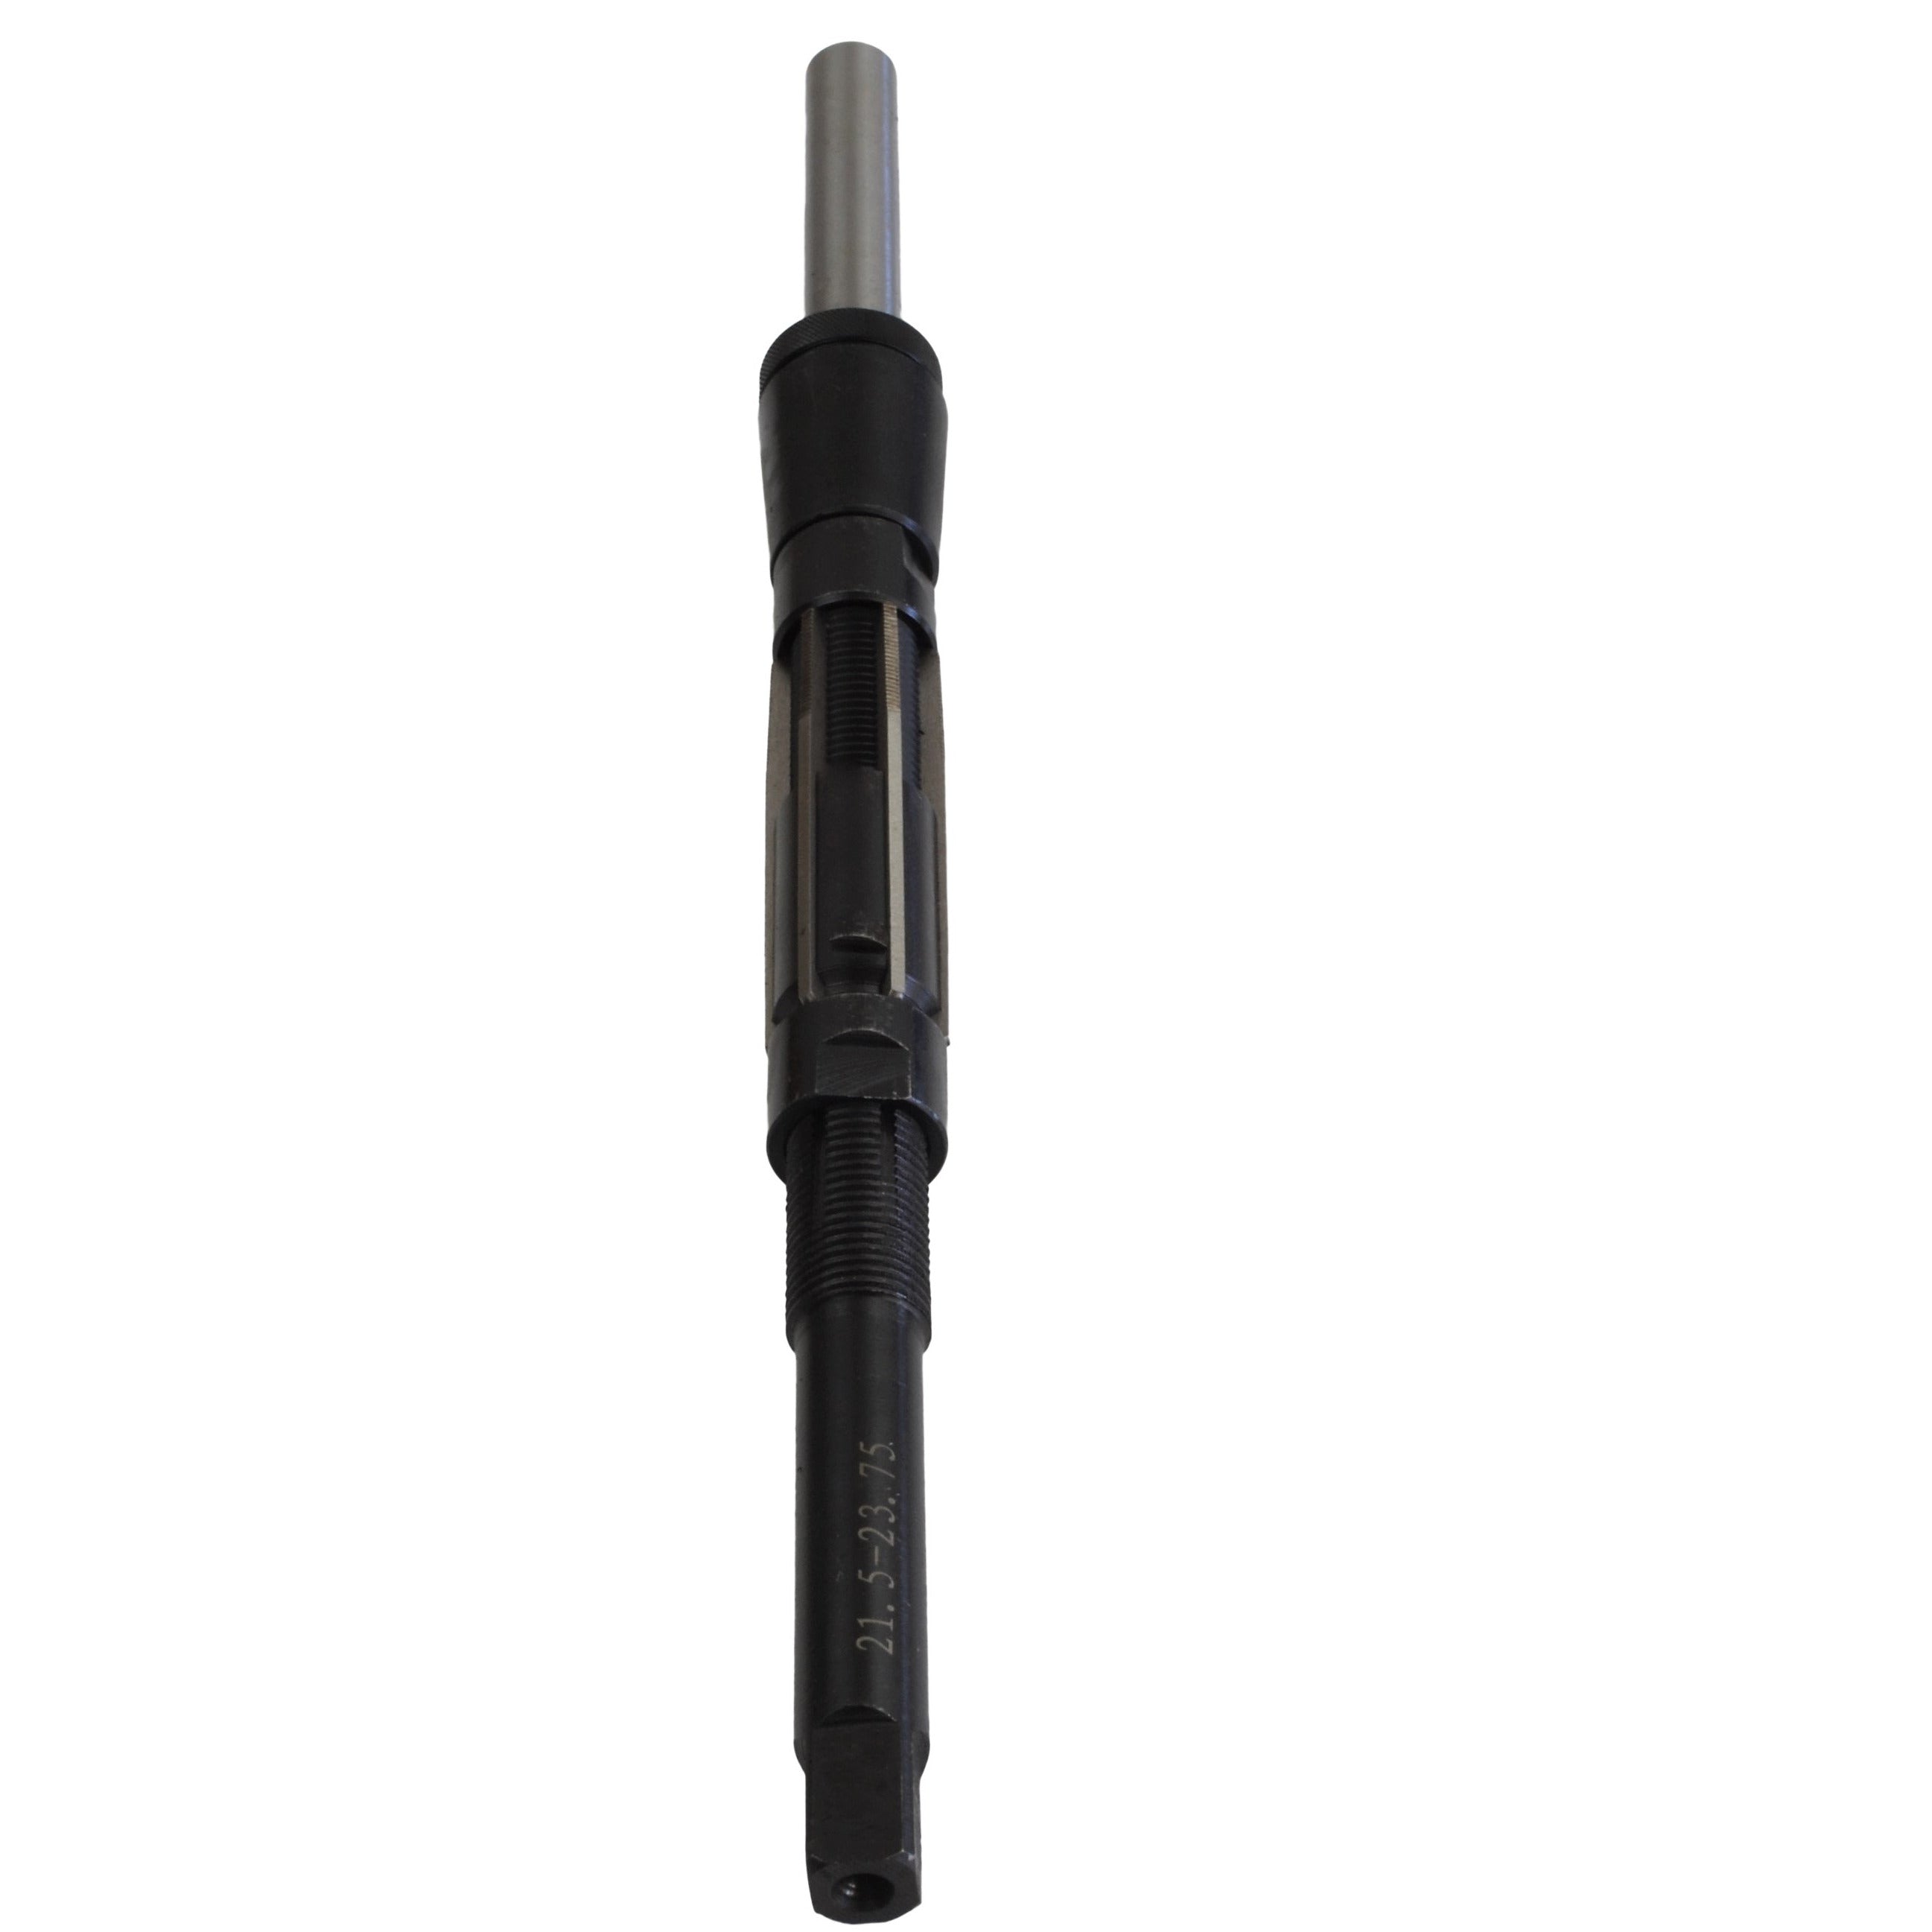 21.5 - 23.75 mmmm Adjustable Hand Reamer with Guide